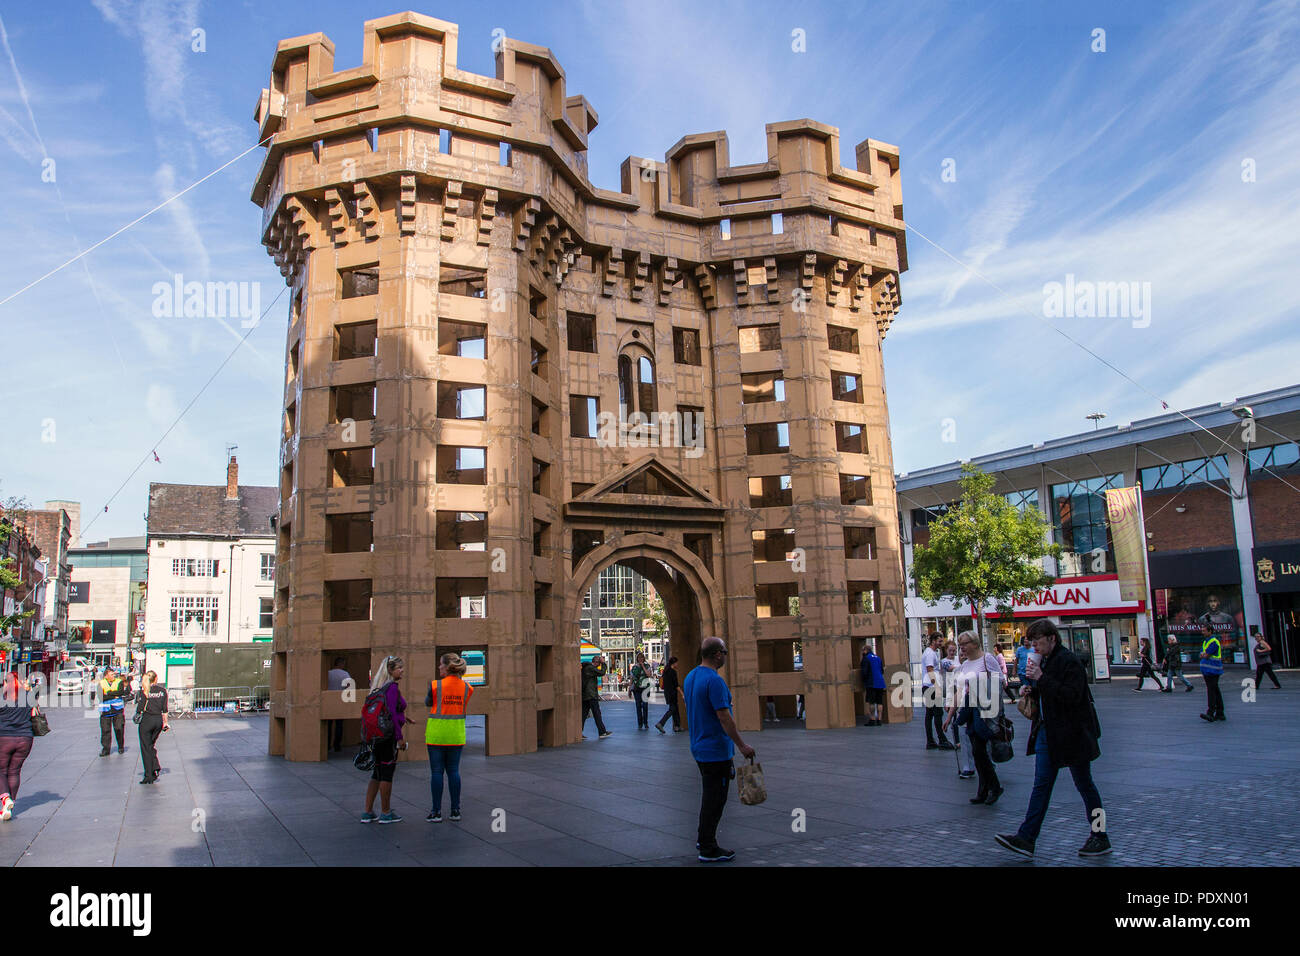 Upcycled cardboard Models, Turrets & Towers in Liverpool, Merseyside, UK  11th August, 2019 'Gigantic Lost Castles' French artist Olivier Grossetête  responds to the Liverpool City Region's architectural heritage with  extraordinary medieval masterpiece